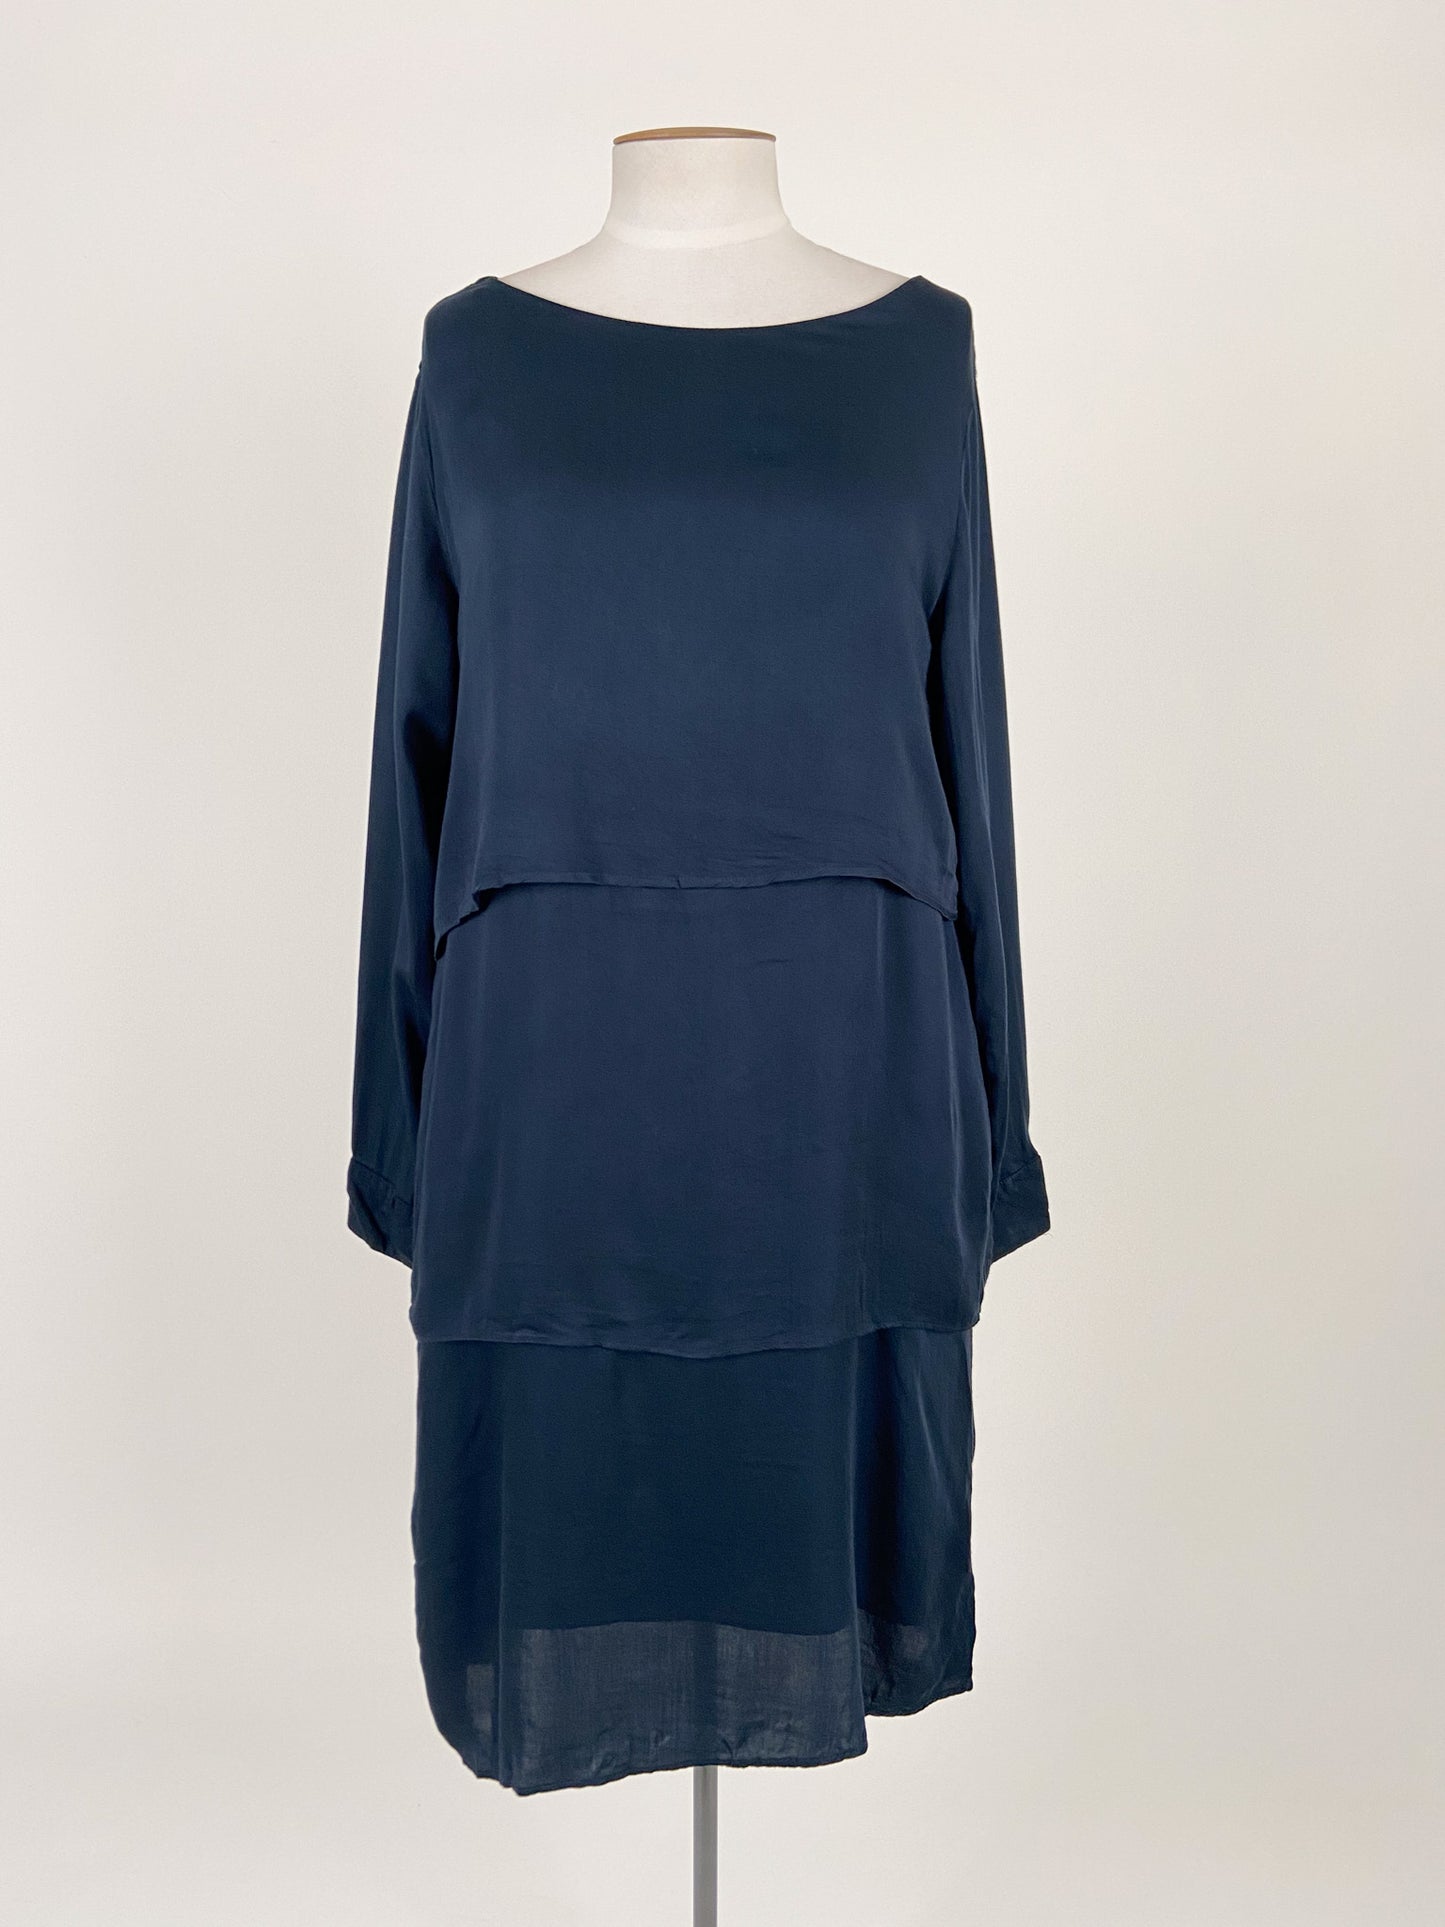 PQ The Label | Navy Casual Dress | Size M